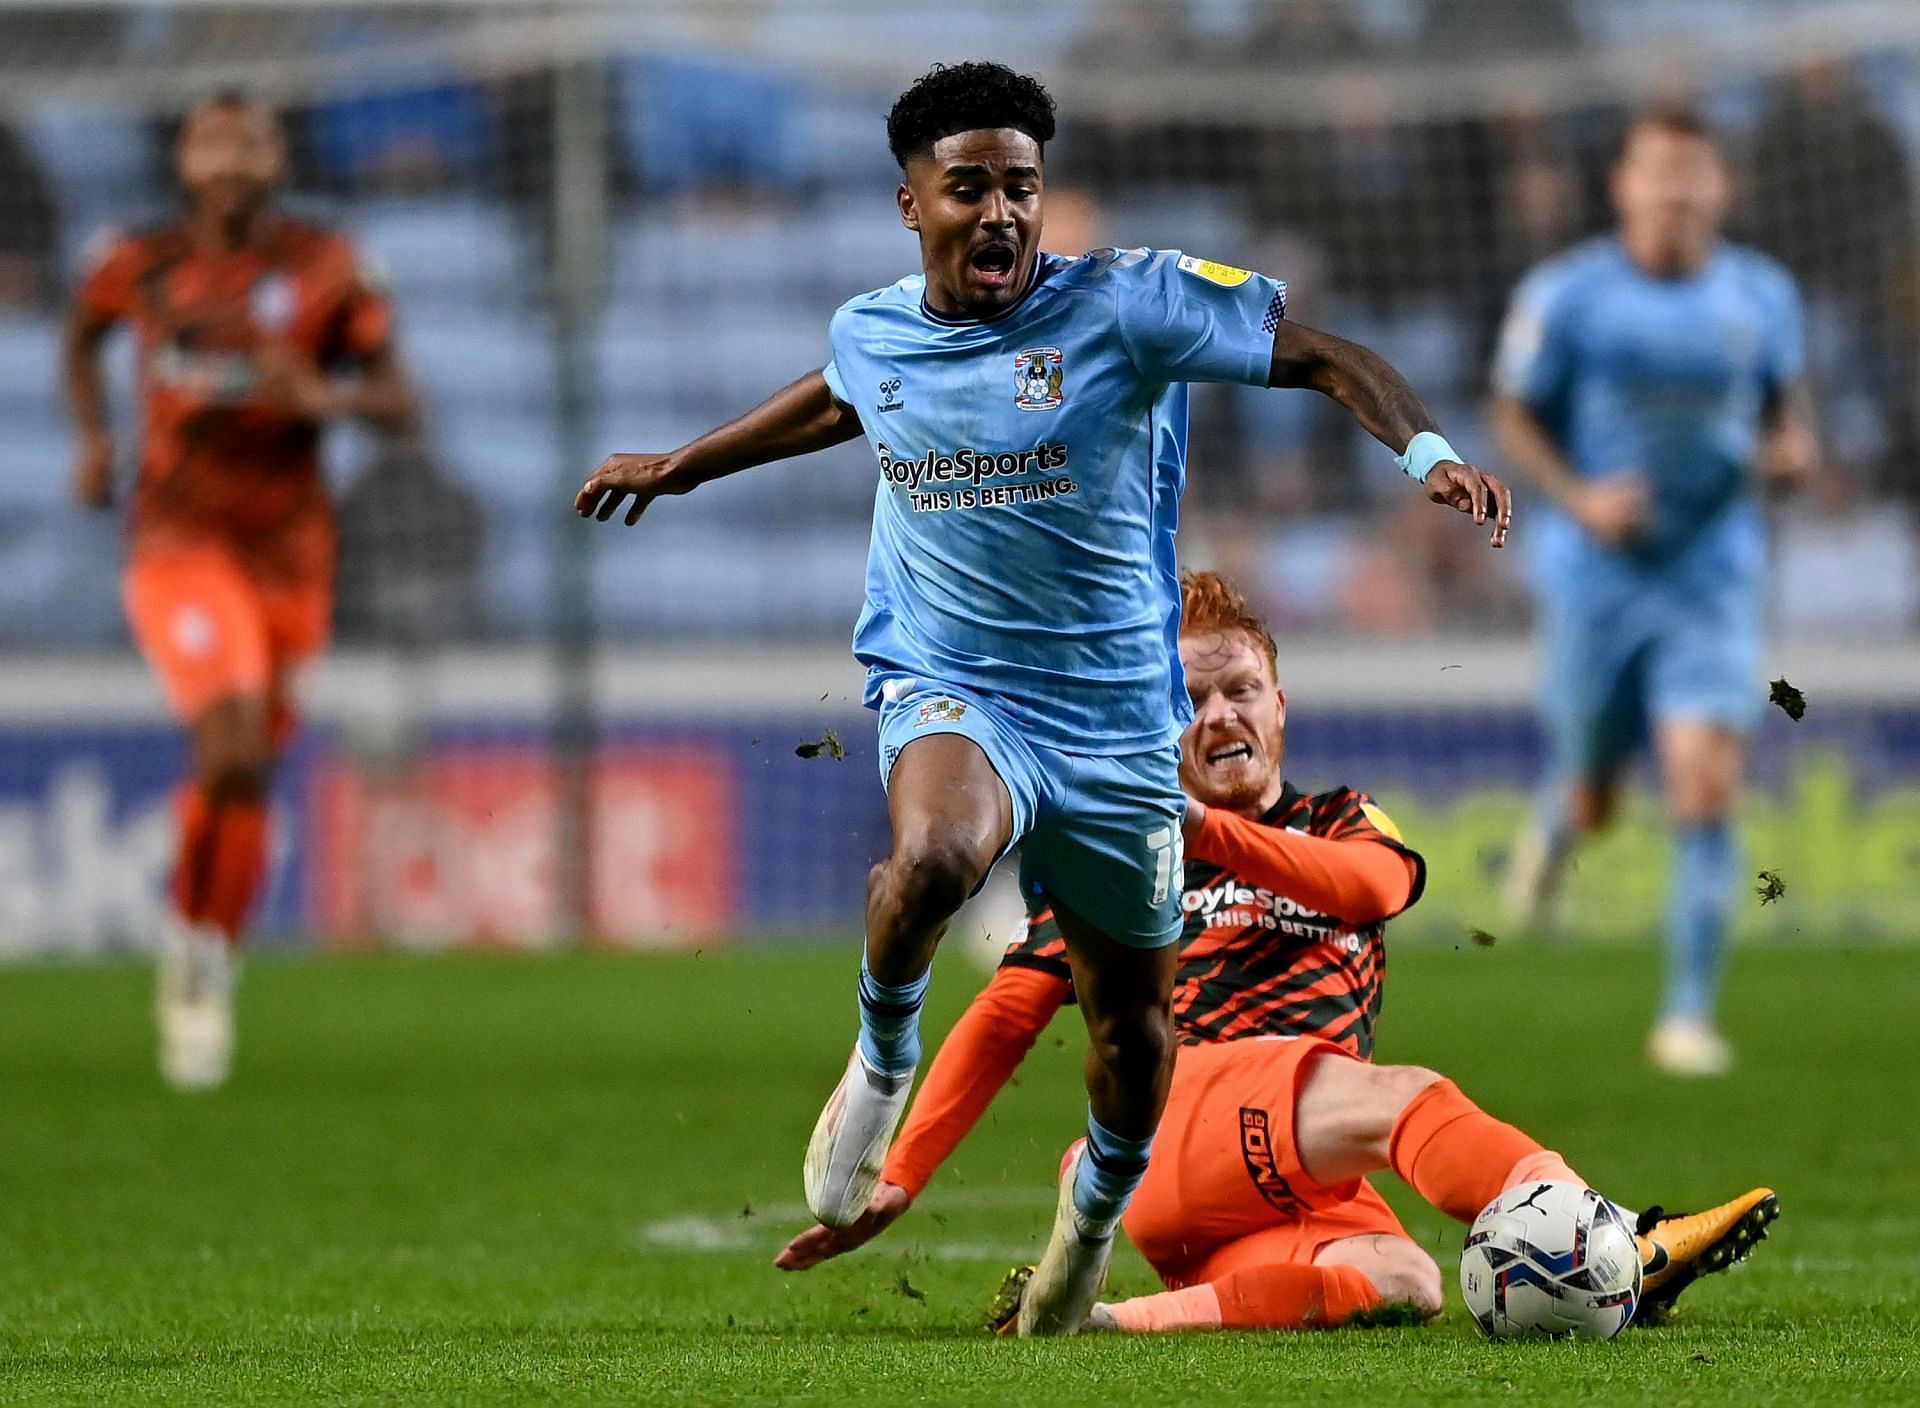 Ian Maatsen in action for Coventry City on loan from Chelsea